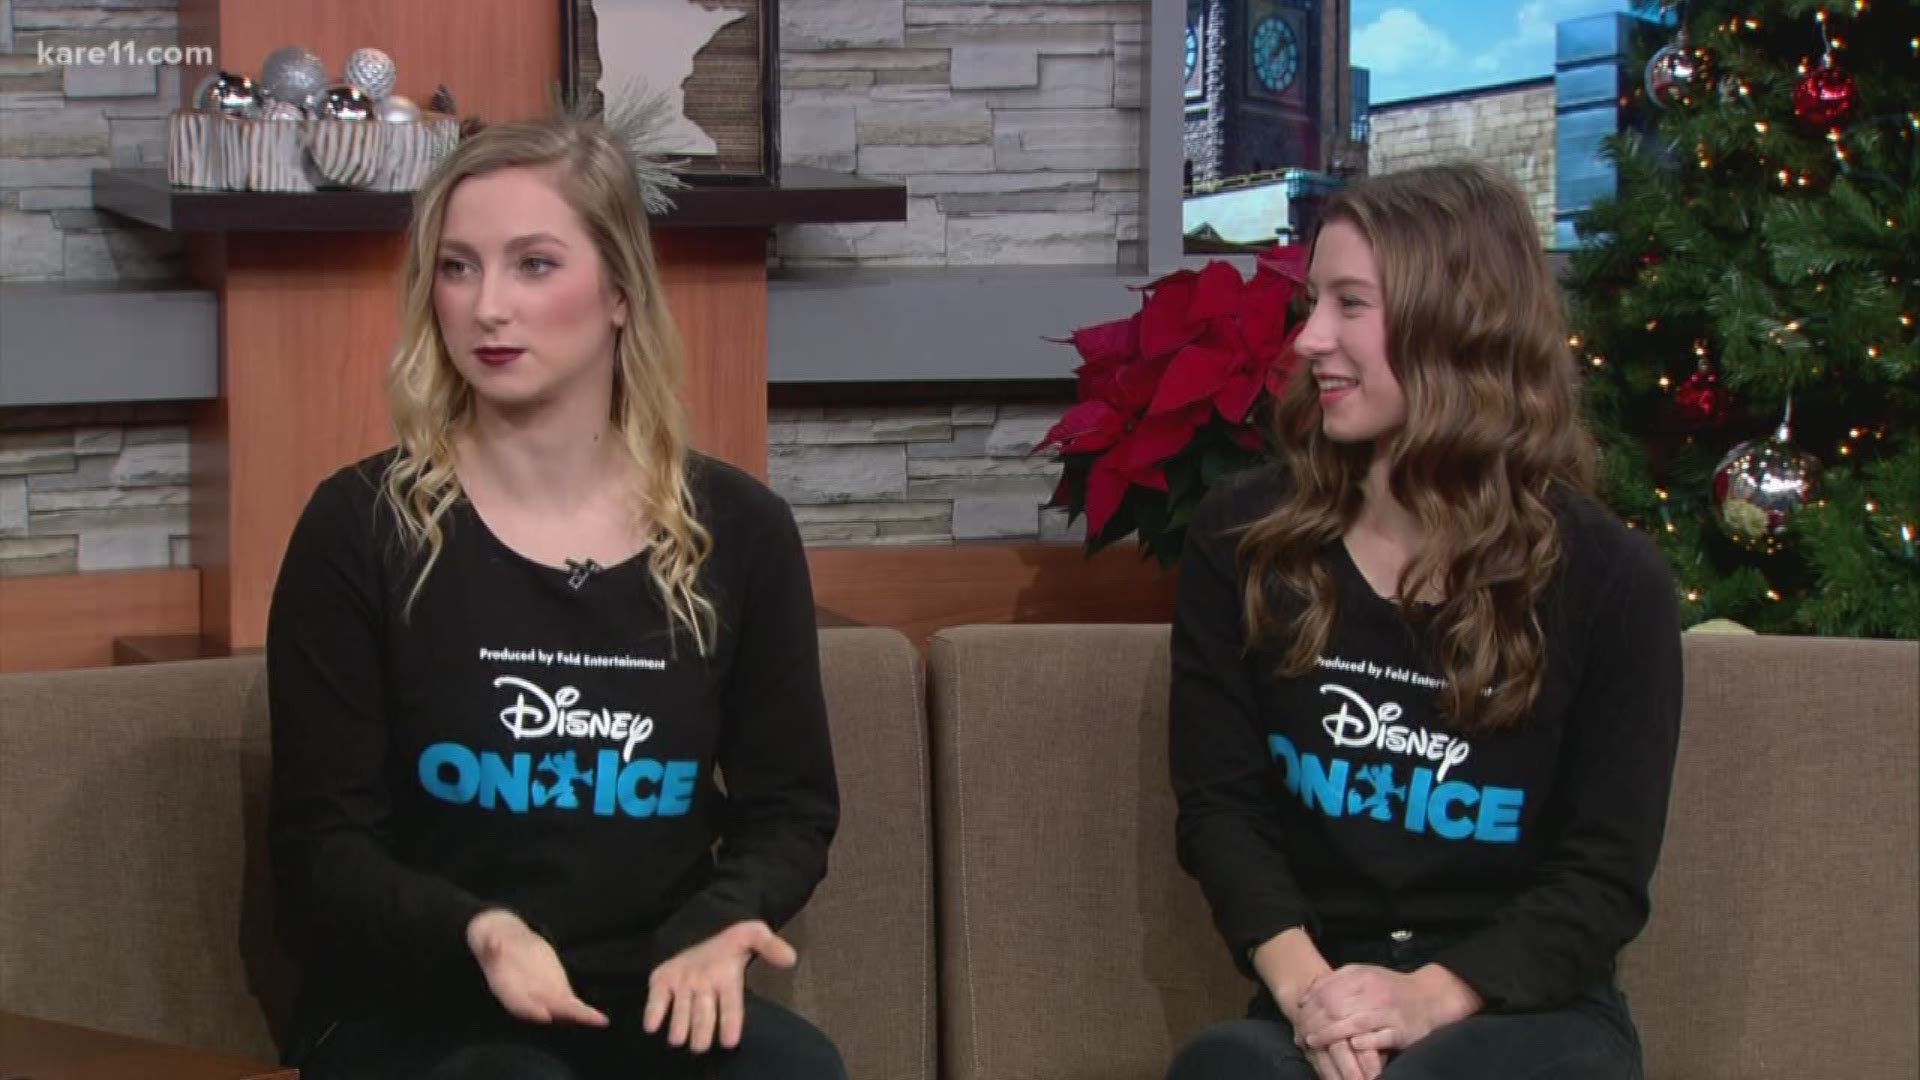 The latest Disney On Ice spectacular is in town at the Xcel Energy Center, and the show features 2 skaters who grew up right here in Minnesota.